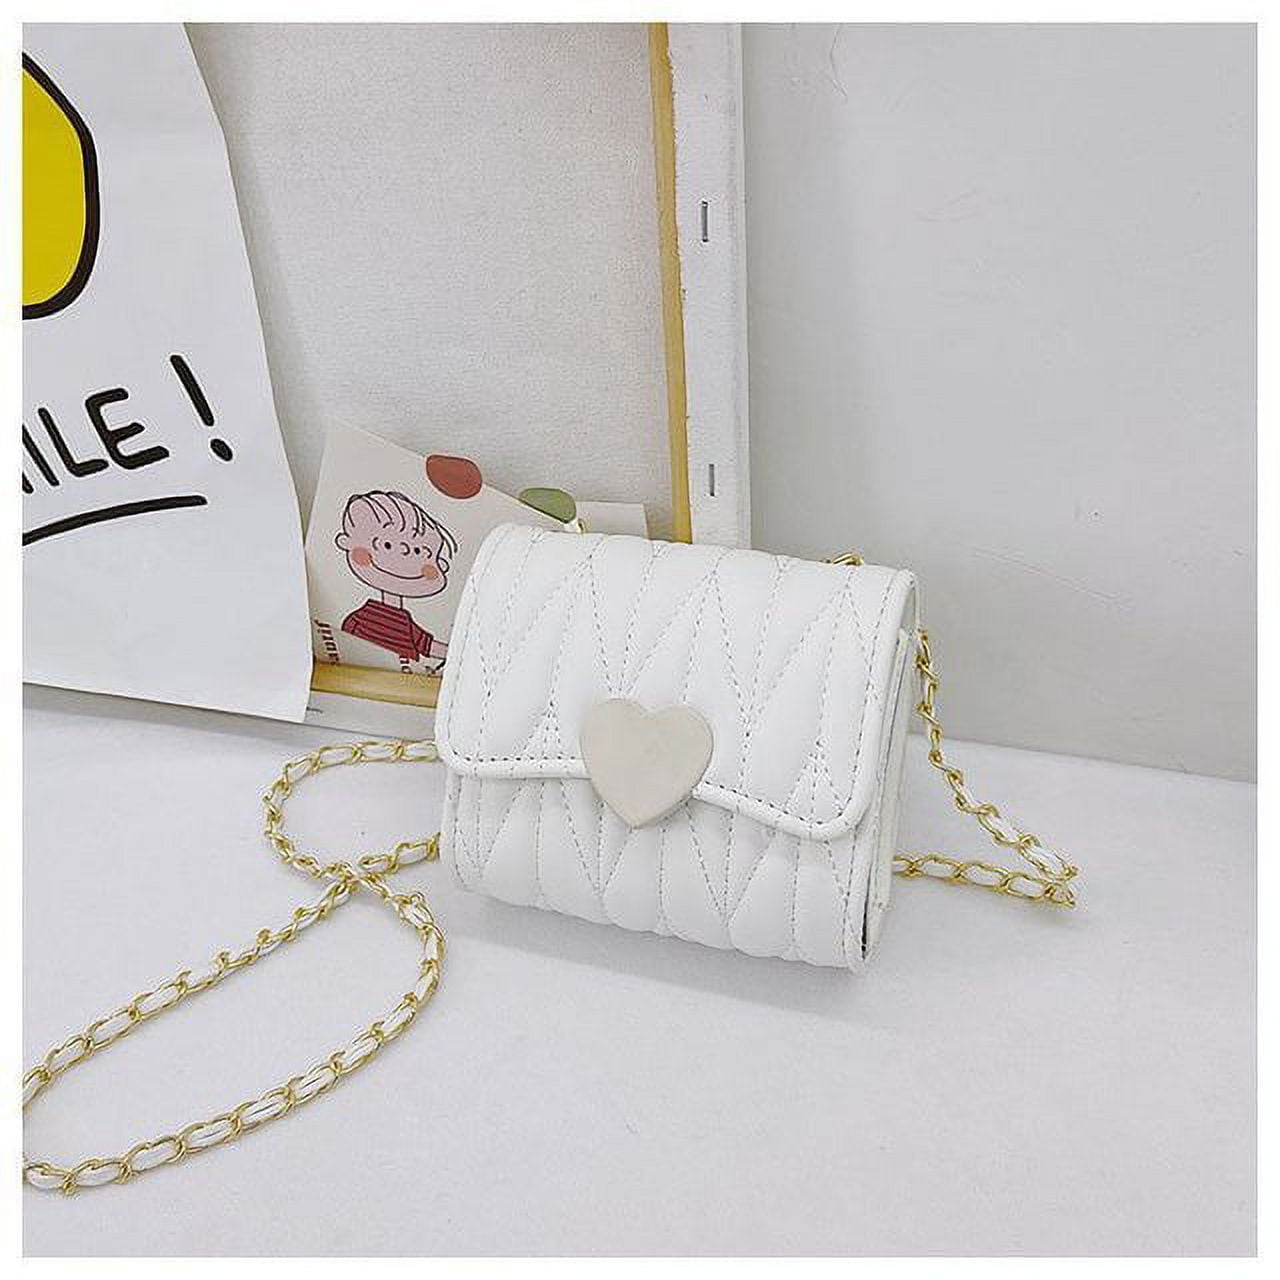 CoCopeaunts Fashion Heart Baby Girls Small Shoulder Bags Kids Coin Purse  Accessories Handbags Lovely Childrens Mini Square Messenger Bag 